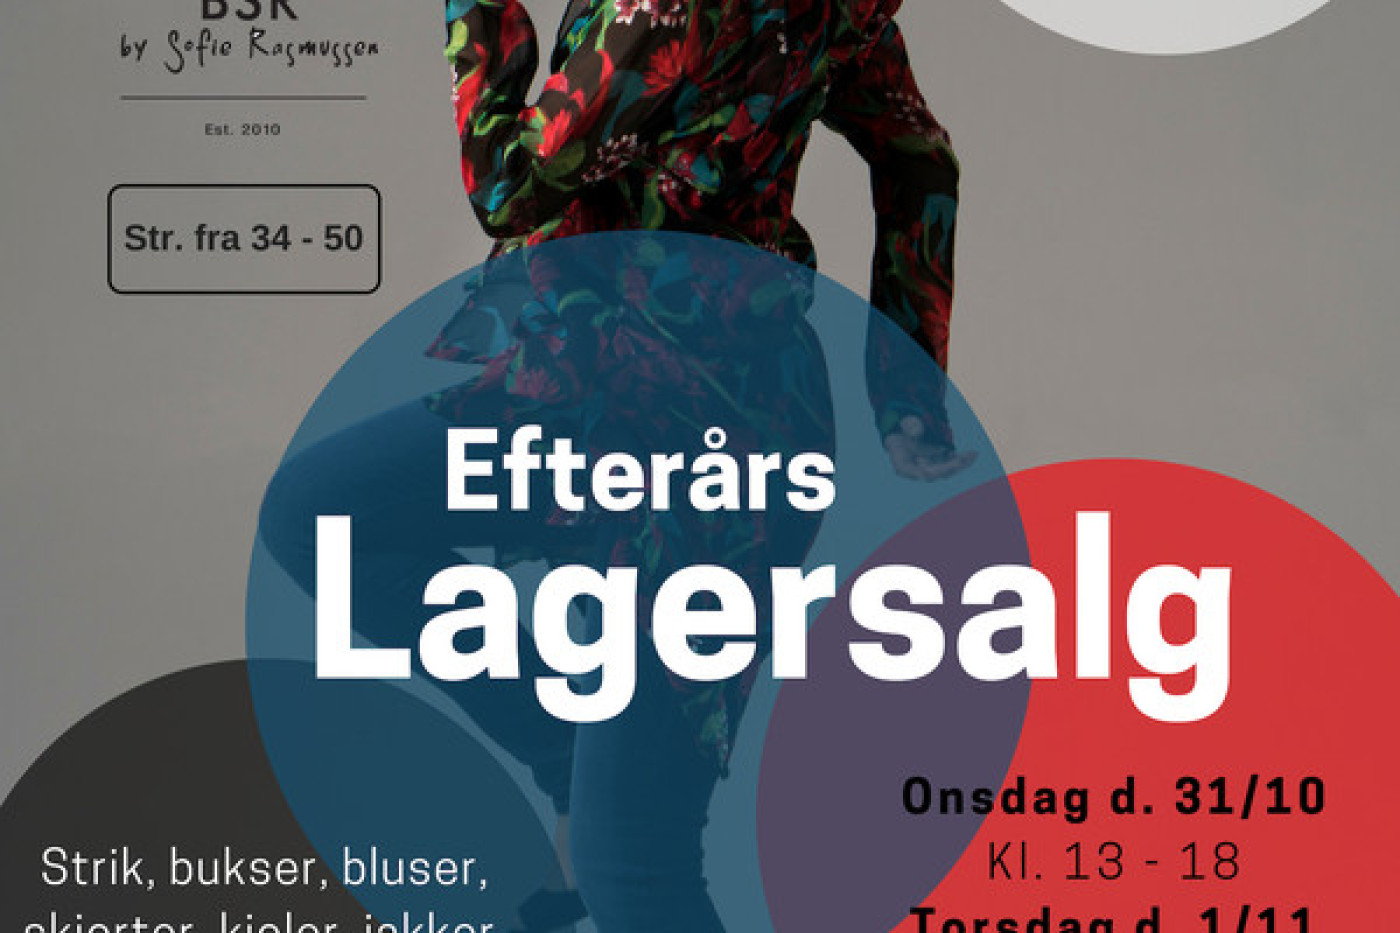 Womens Wear Group lagersalg